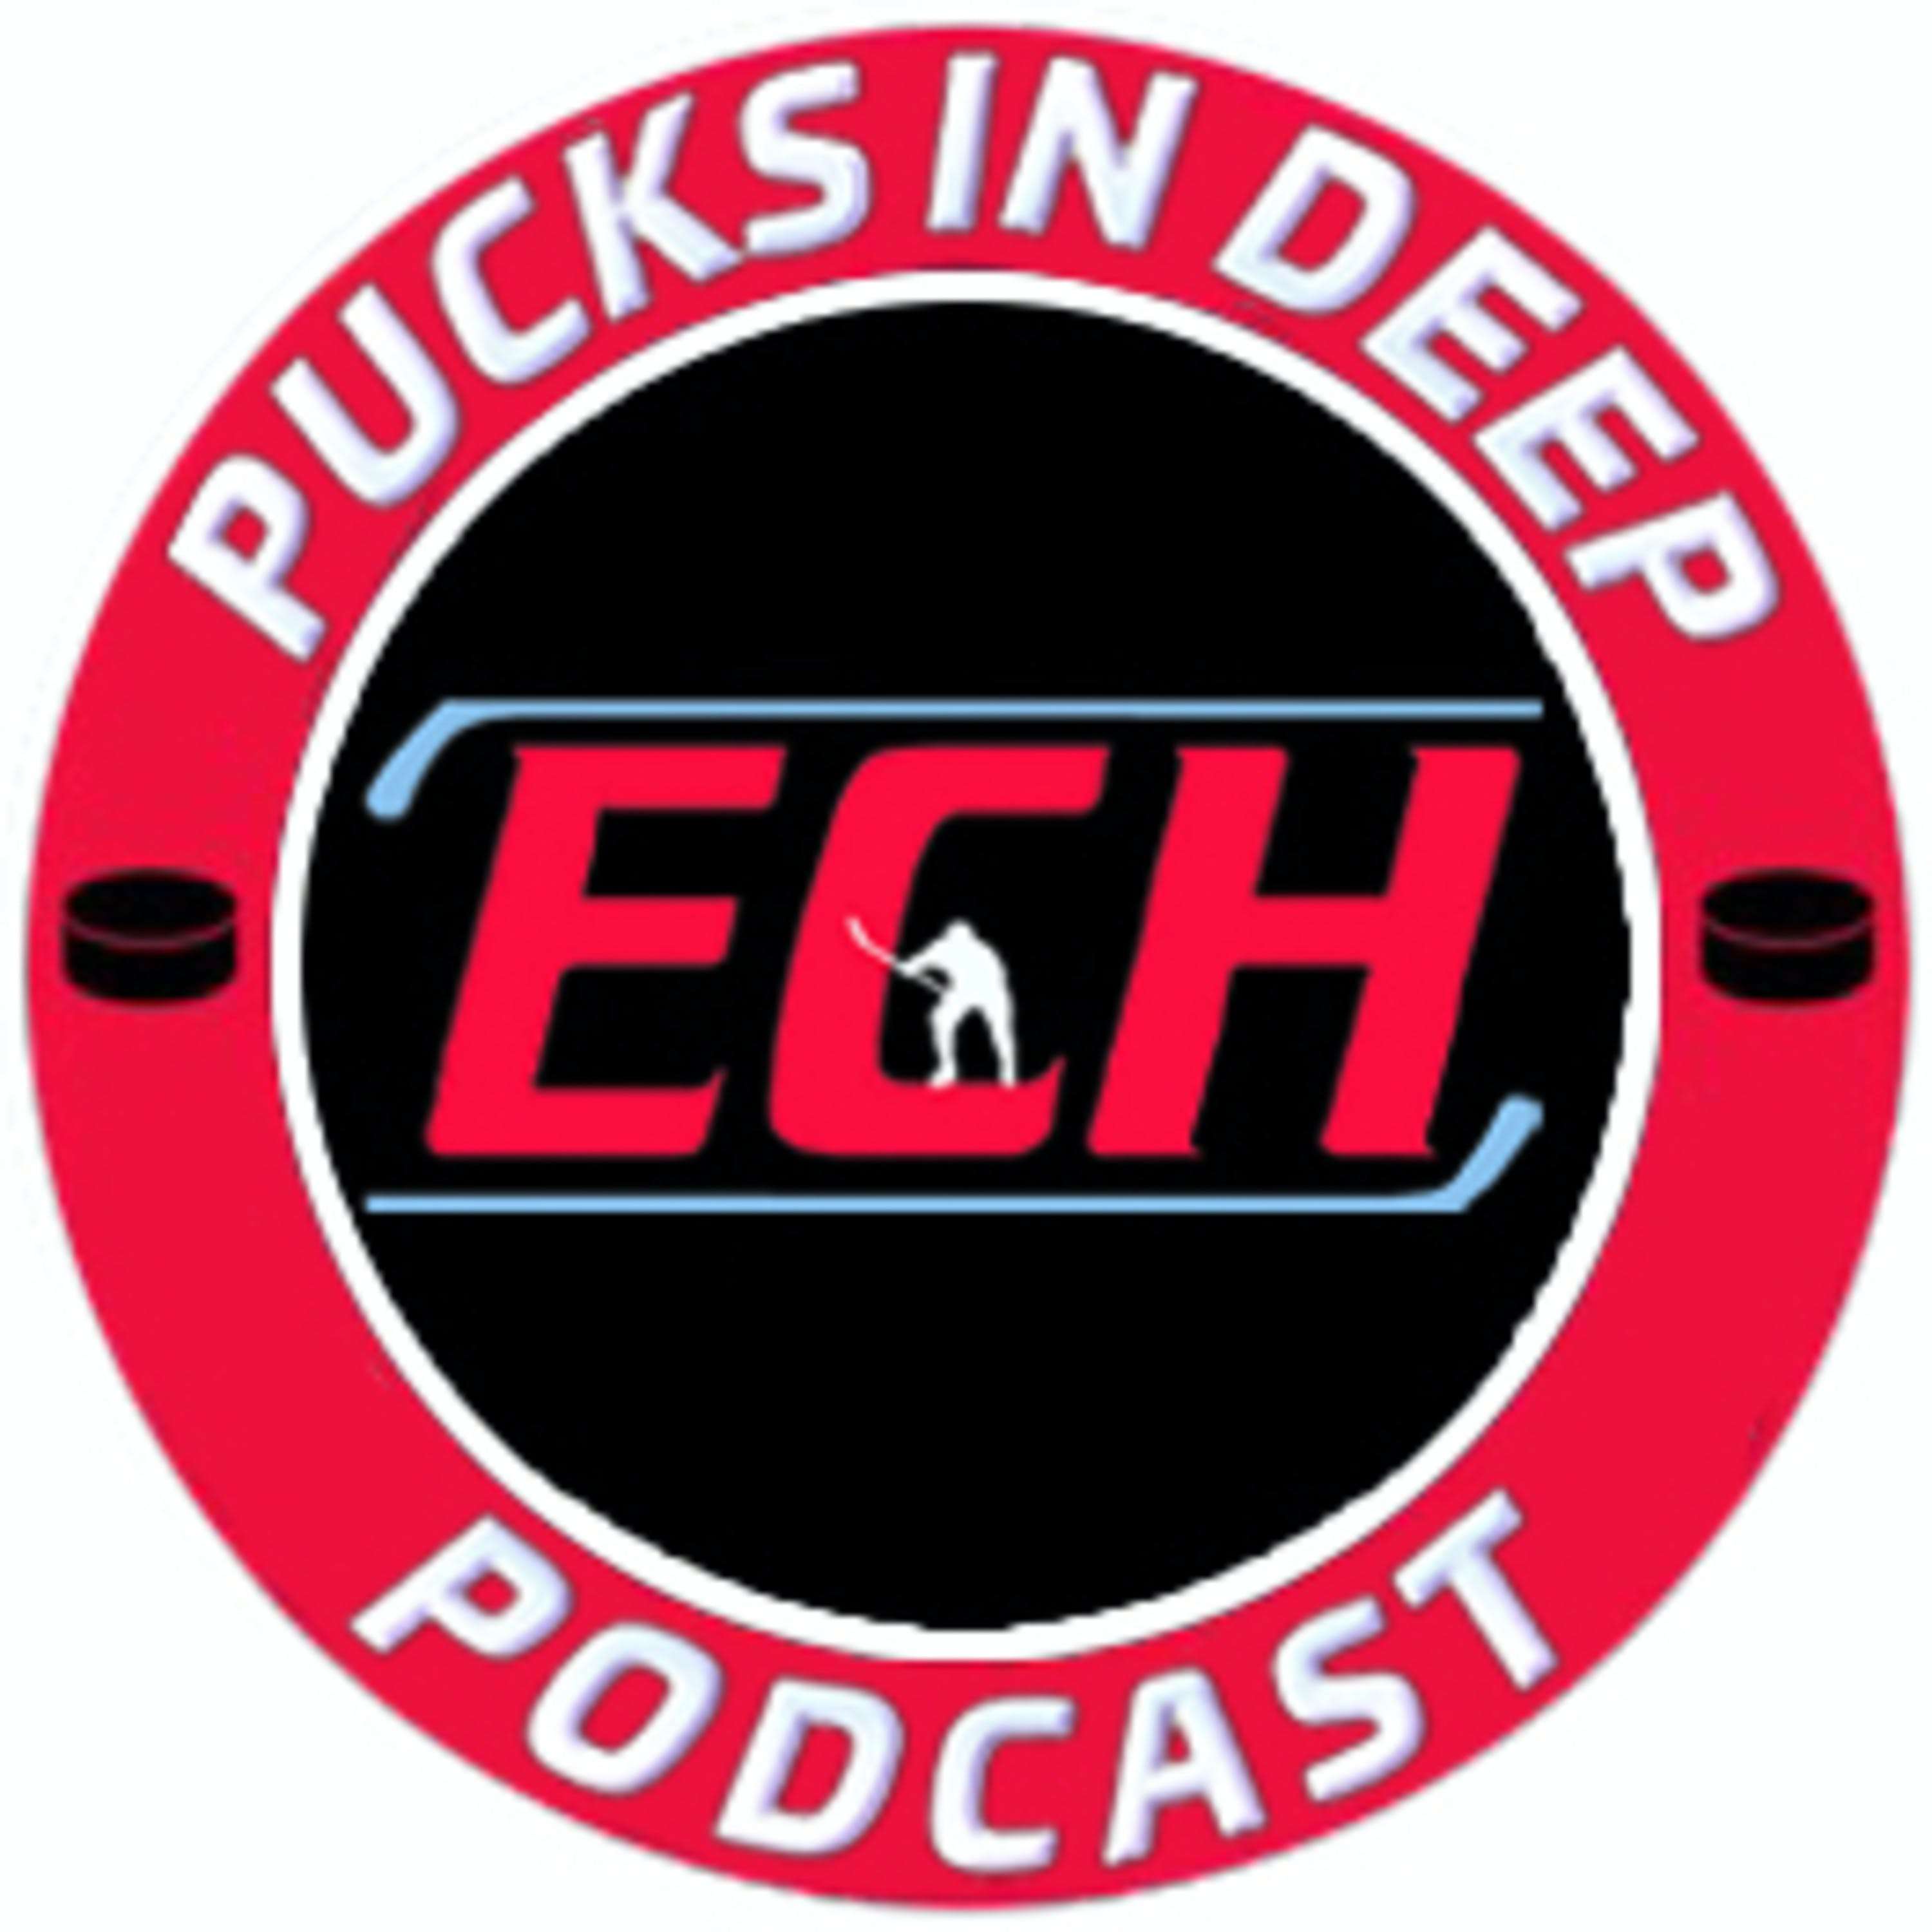 Episode #146 of Pucks in Deep FT: Riese Gaber Featured Image